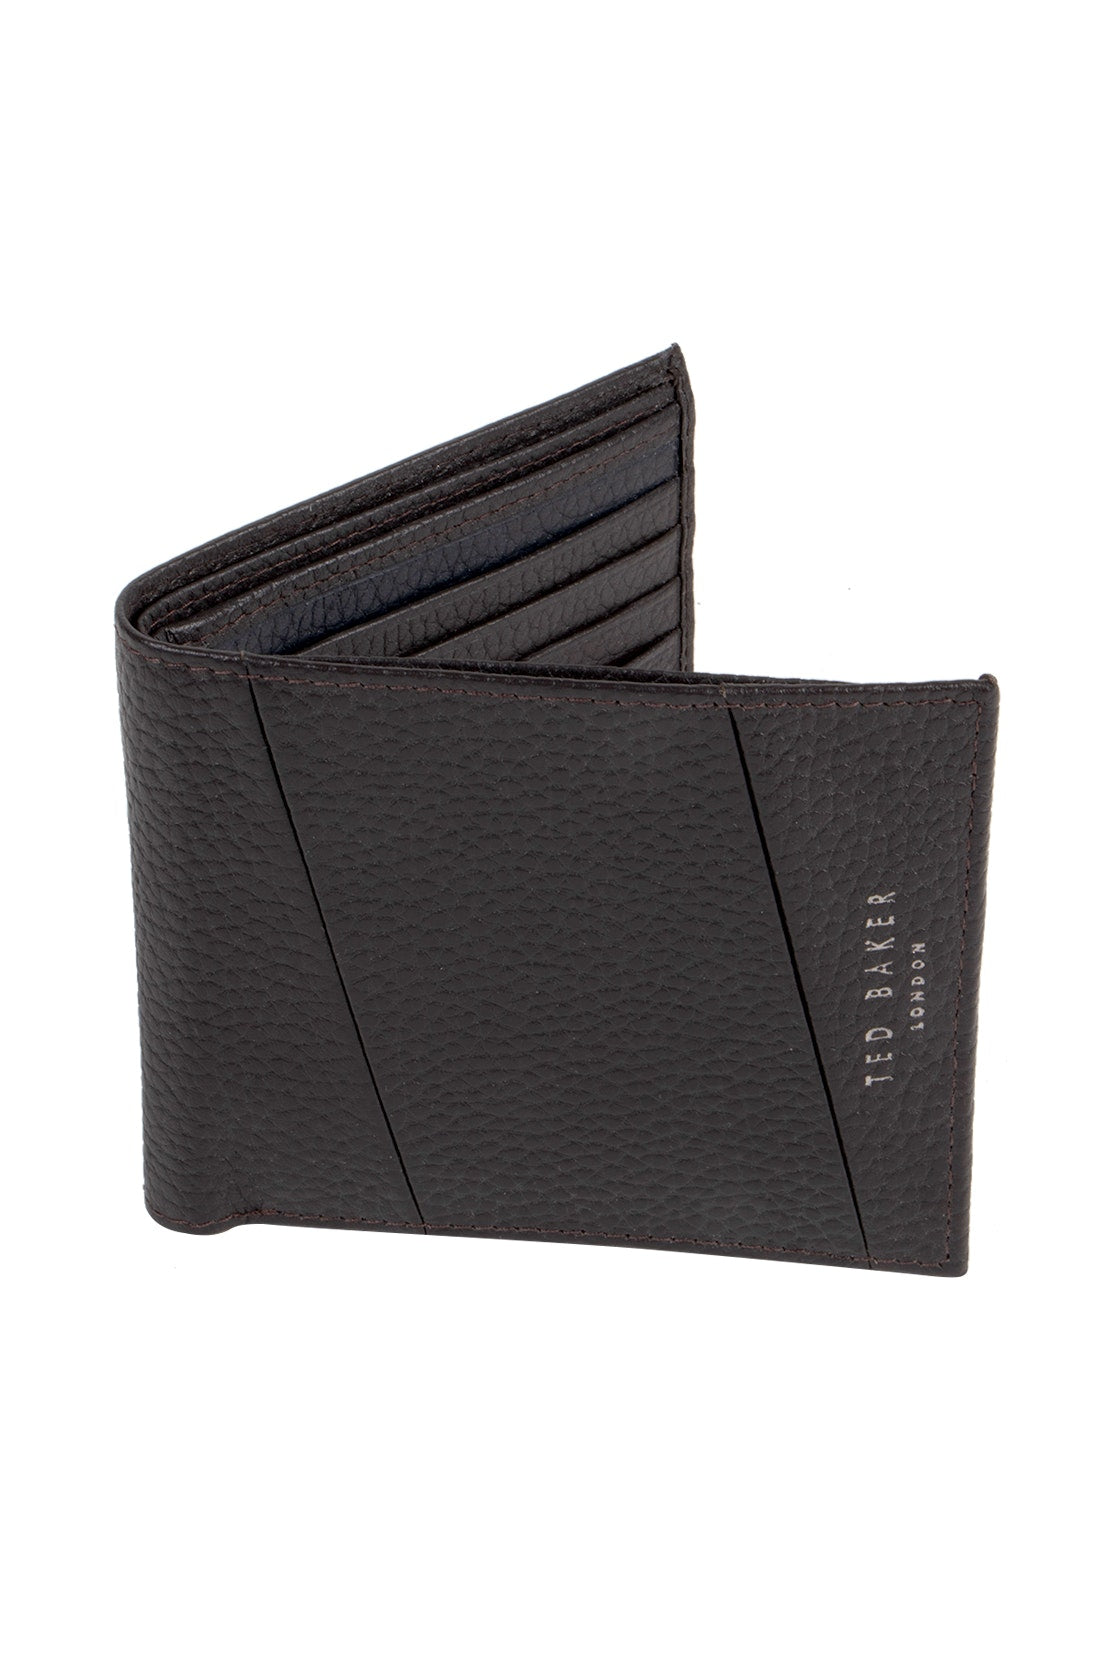 Ted Baker Fiters Chocolate Wallet